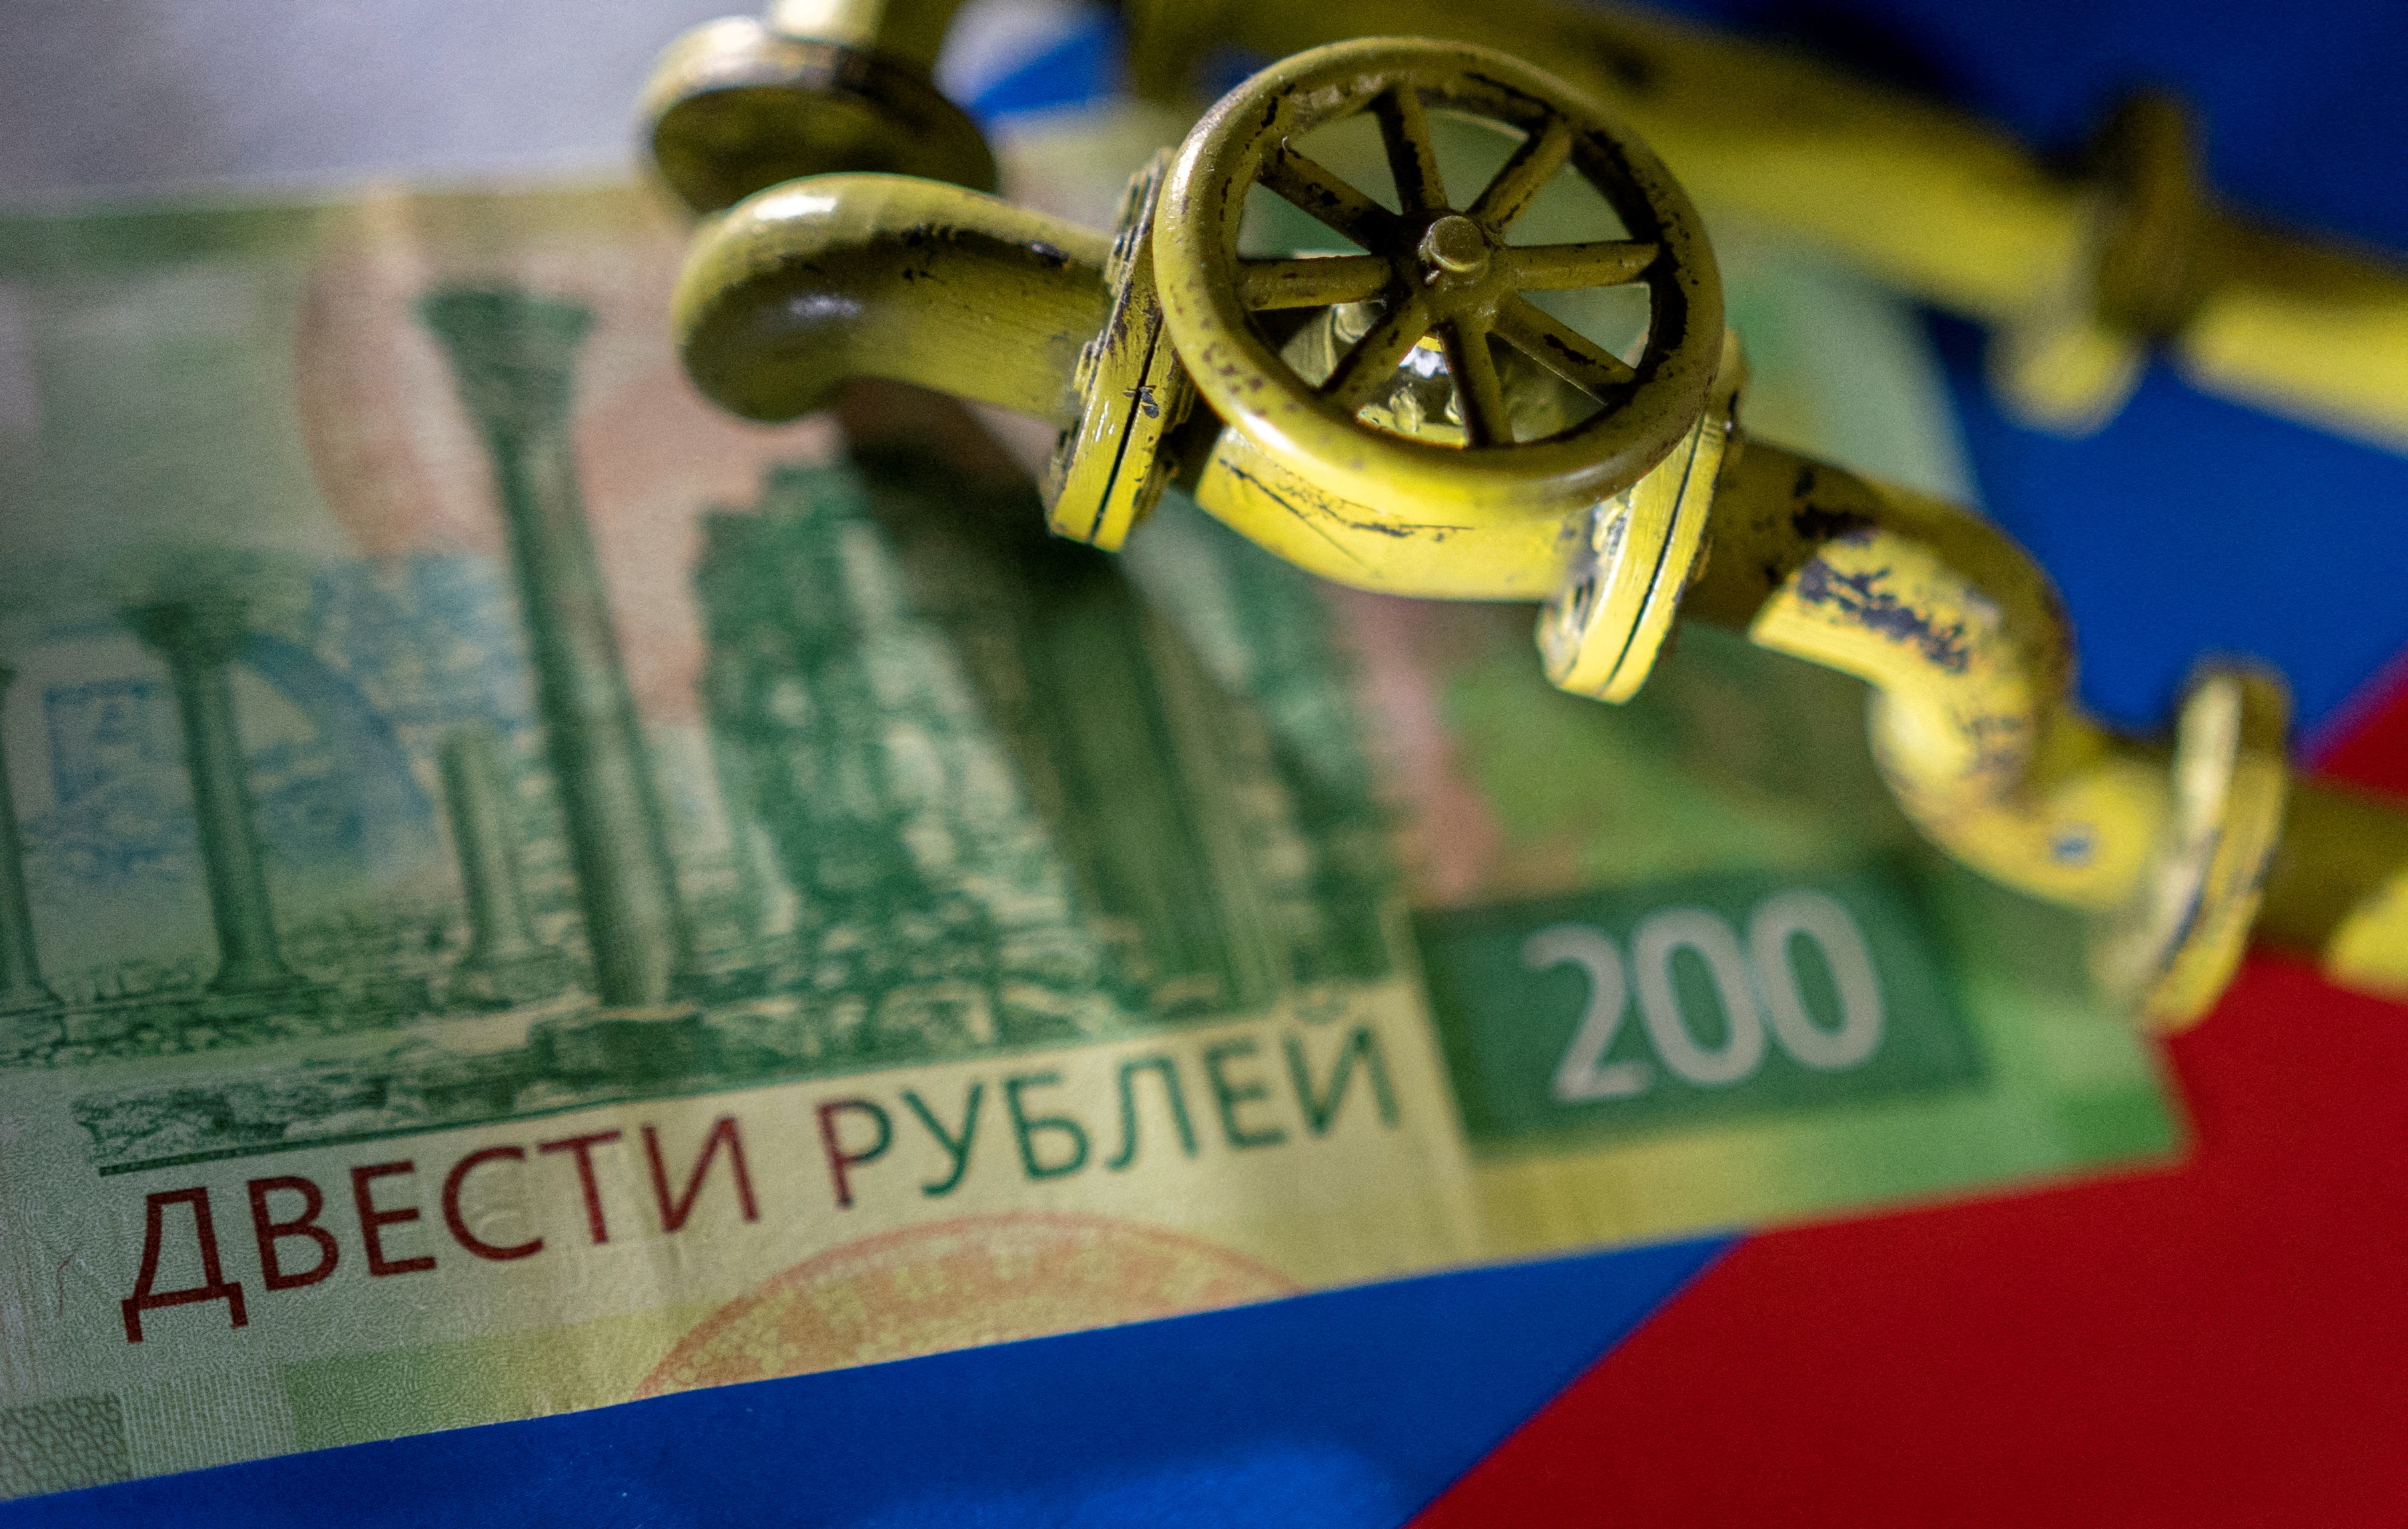 llustration shows natural gas pipeline, Russian rouble banknote and flag